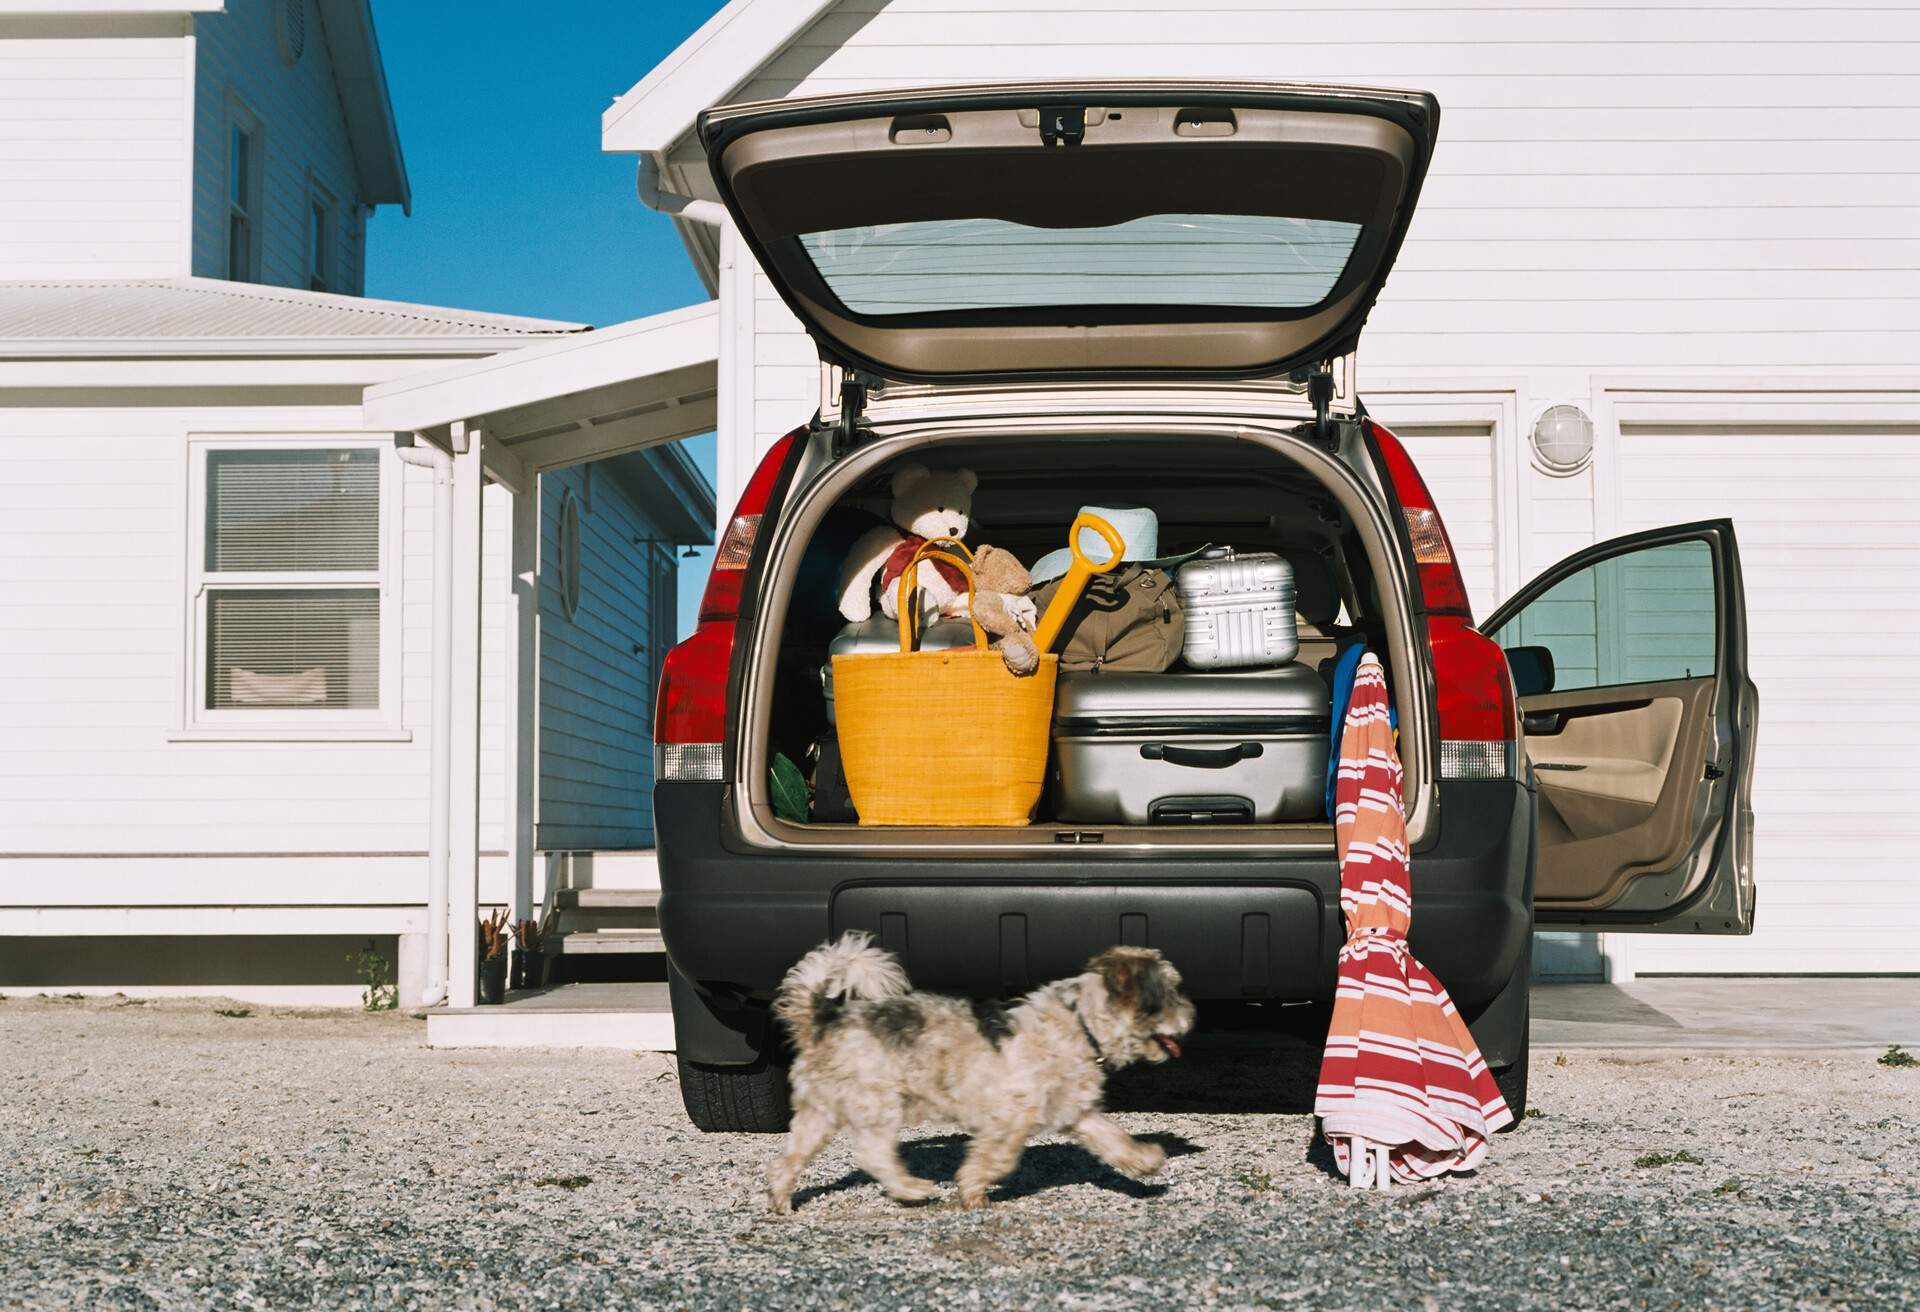 theme_luggage_car_dog_gettyimages-56181232_universal_within-usage-period_82212